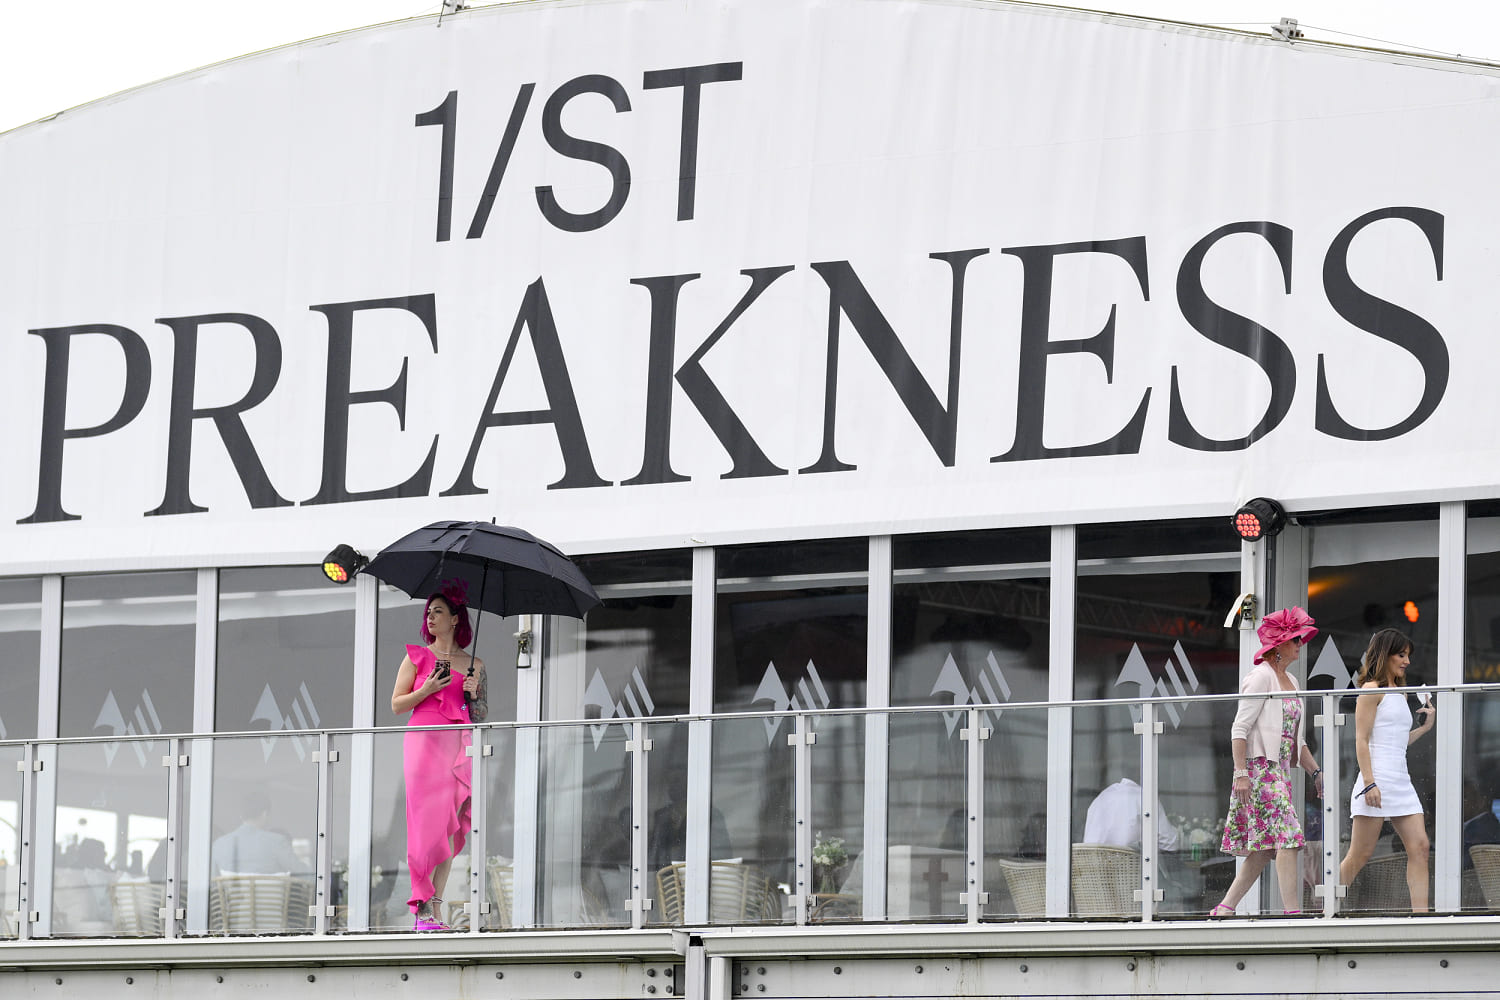 Seize the Grey wins the Preakness Stakes, ruining Mystik Dan’s Triple Crown odds